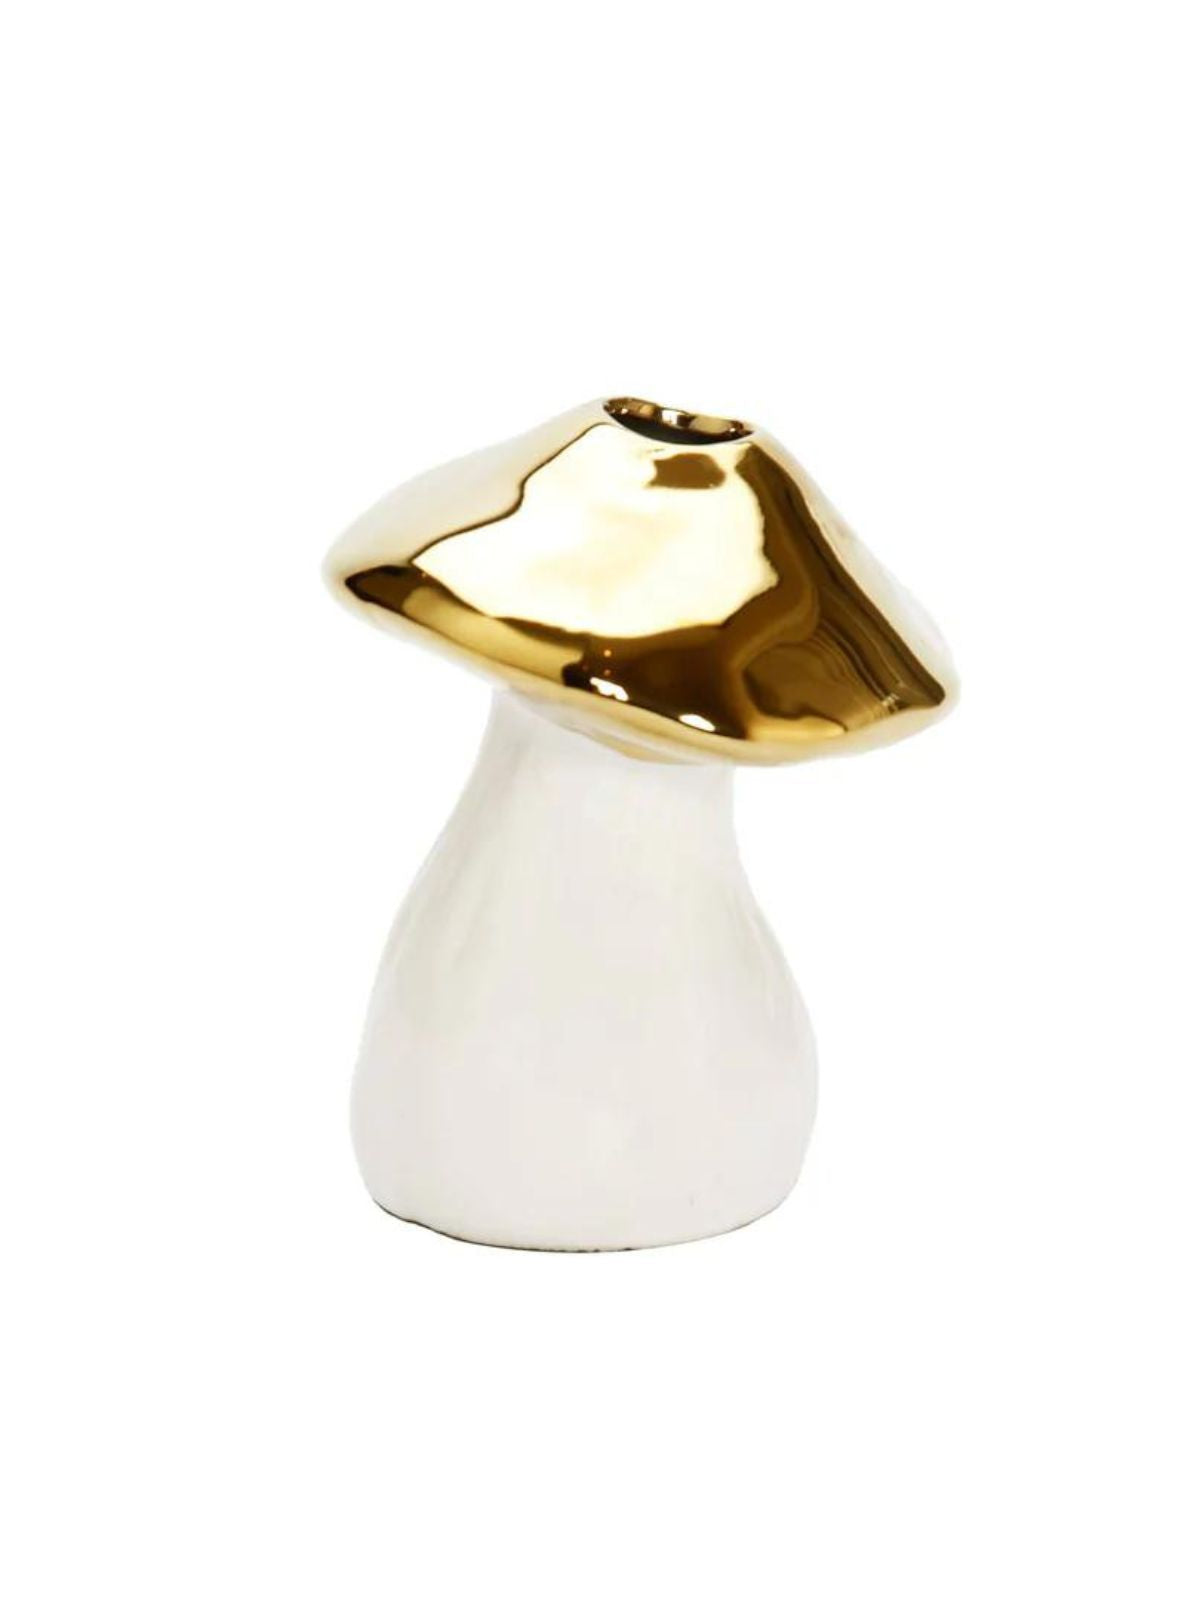 Luxury White and Gold Ceramic Mushroom Shaped Reed Diffuser with lily floral fragrance sold by KYA Home Decor.